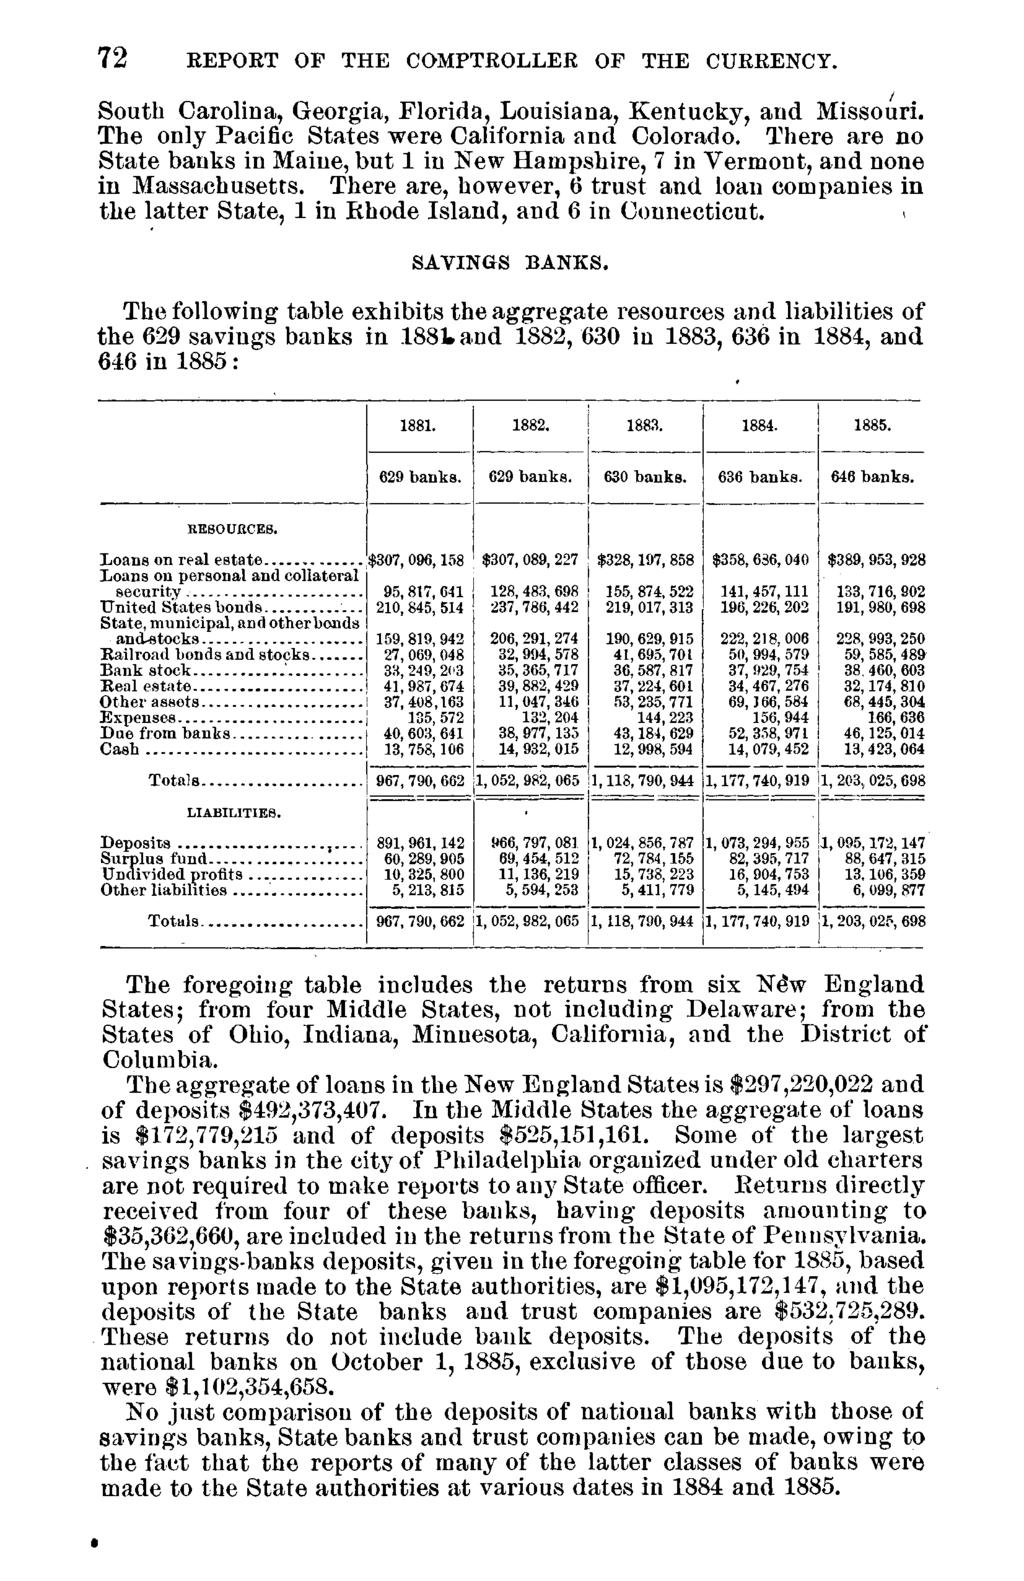 72 REPORT OF THE COMPTROLLER OF THE CURRENCY. South Carolina, Georgia, Florida, Louisiana, Kentucky, and Missouri. The only Pacific States were California and Colorado.